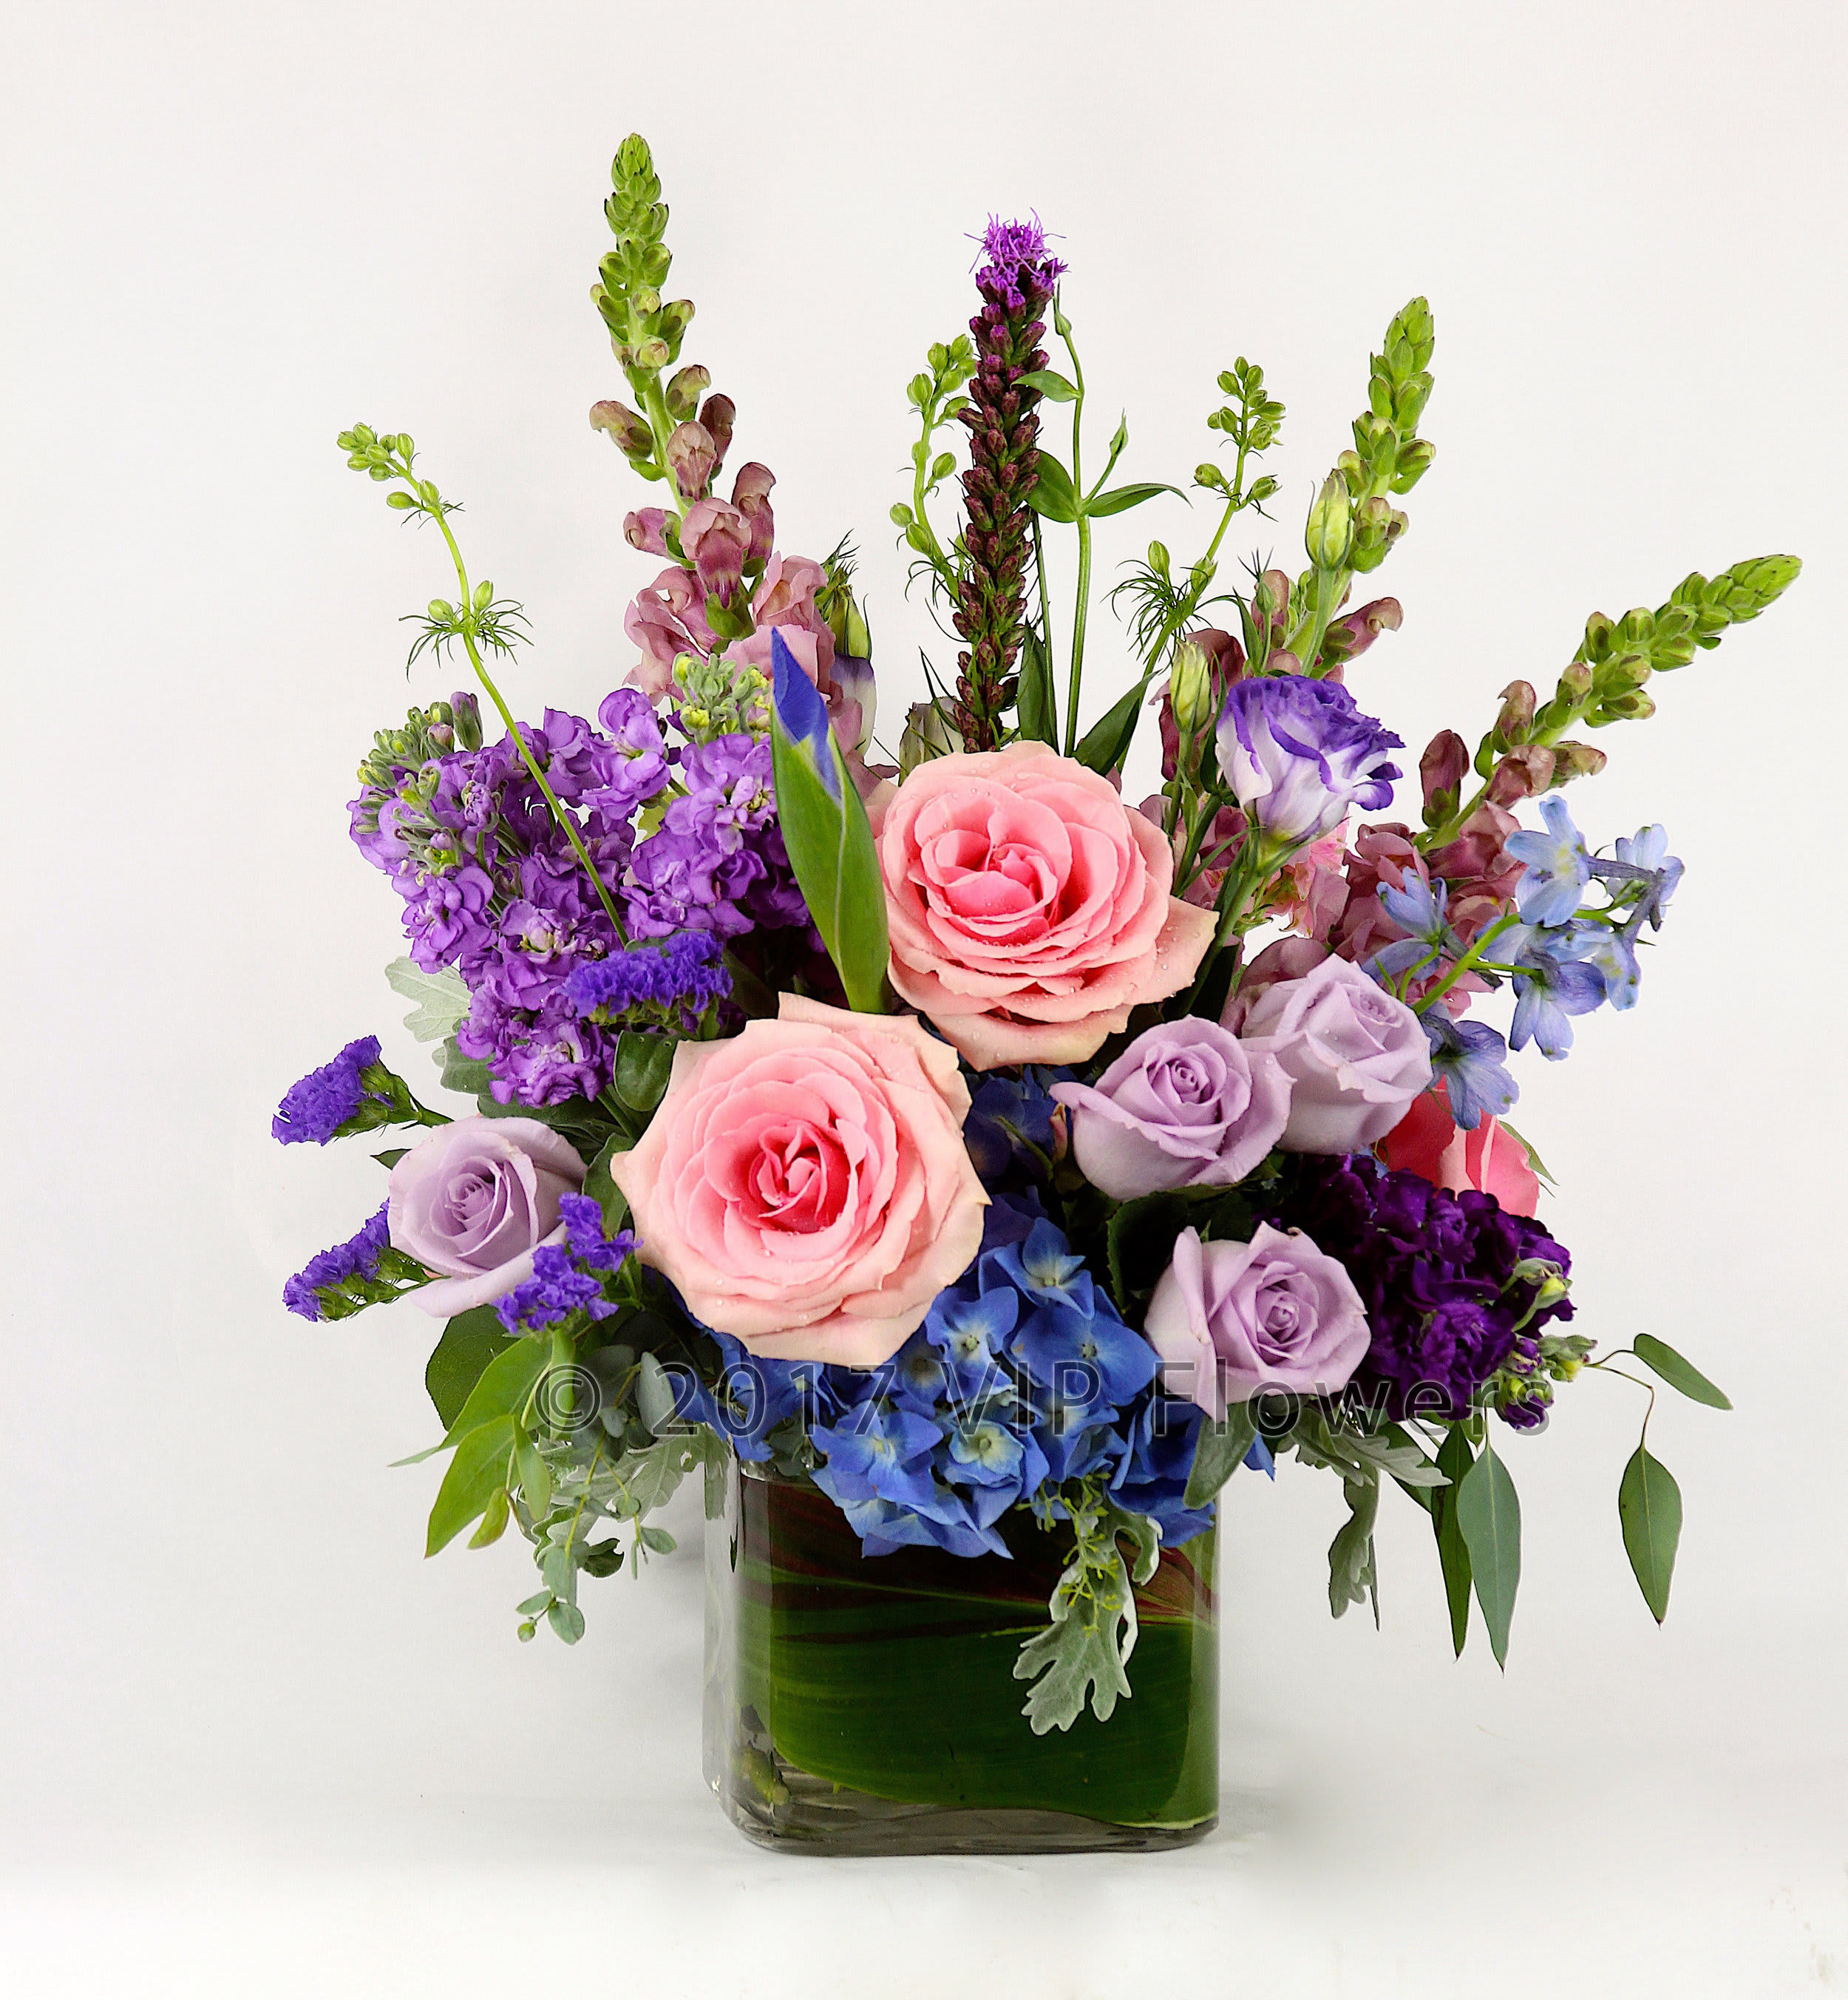 A Flower Cluster - Flowers Included:  Pink Roses Purple Roses Blue Hydrangea Purple Stock Pink Snapdragons Liatris  Seasonal Greens Iris       Substitutions may be necessary to ensure your arrangement or specialty gift is delivered in a timely manner. The utmost care and attention is given to your order to ensure that it is as similar as possible to the requested item (Please note that some flowers and colors may vary due to seasonality.)